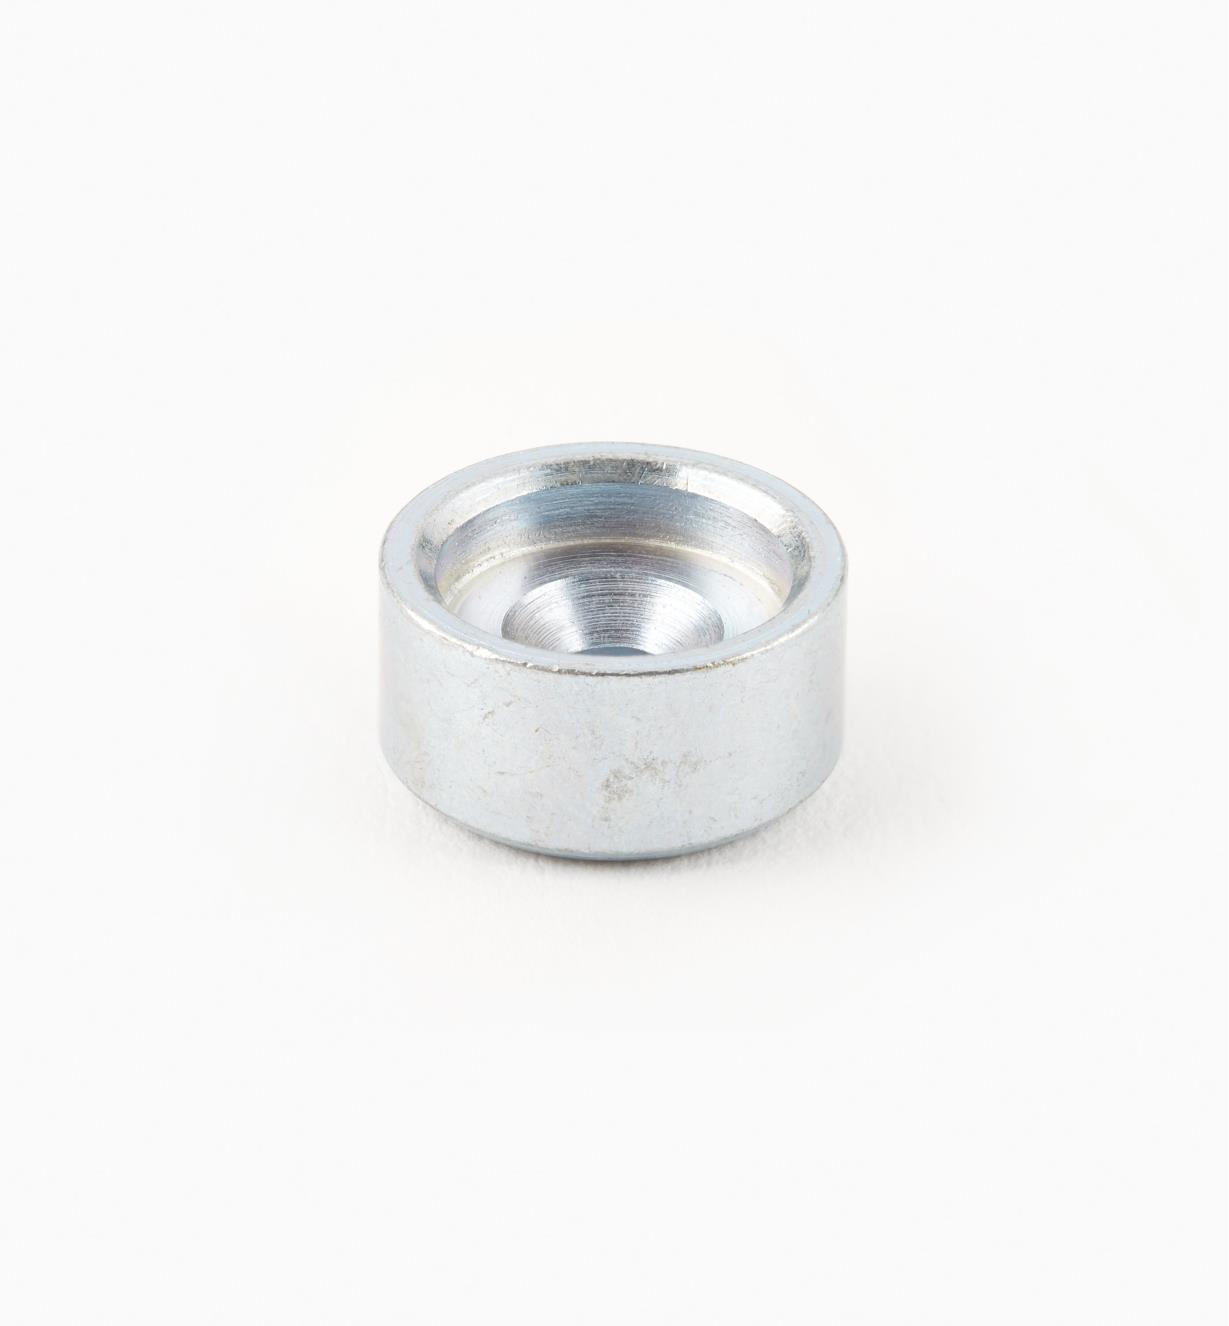 99K3252 - 1/2" Cup for 3/8" Magnet